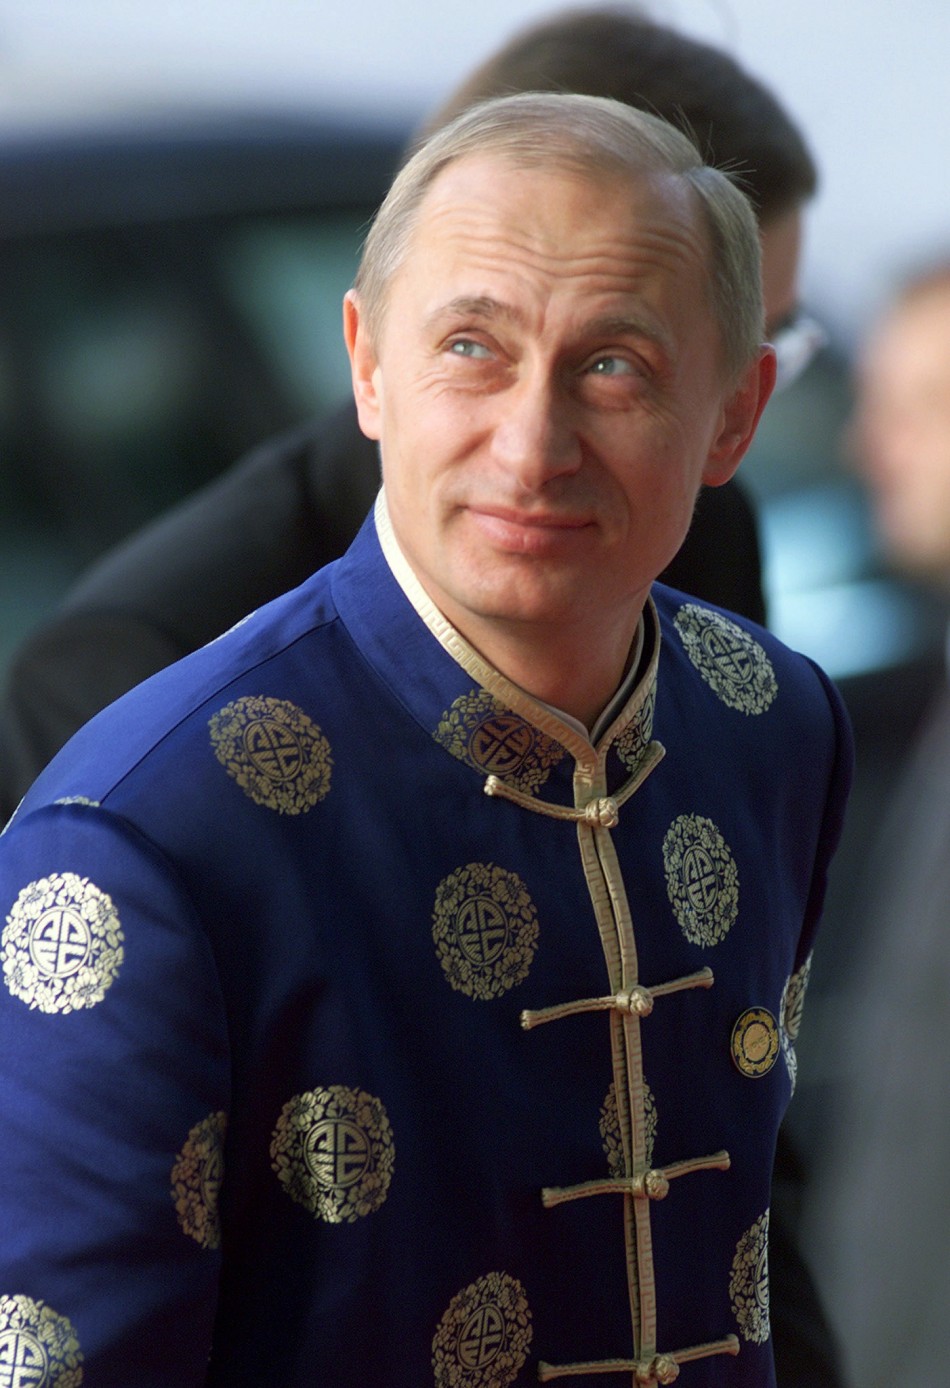 World leaders in traditional outfits